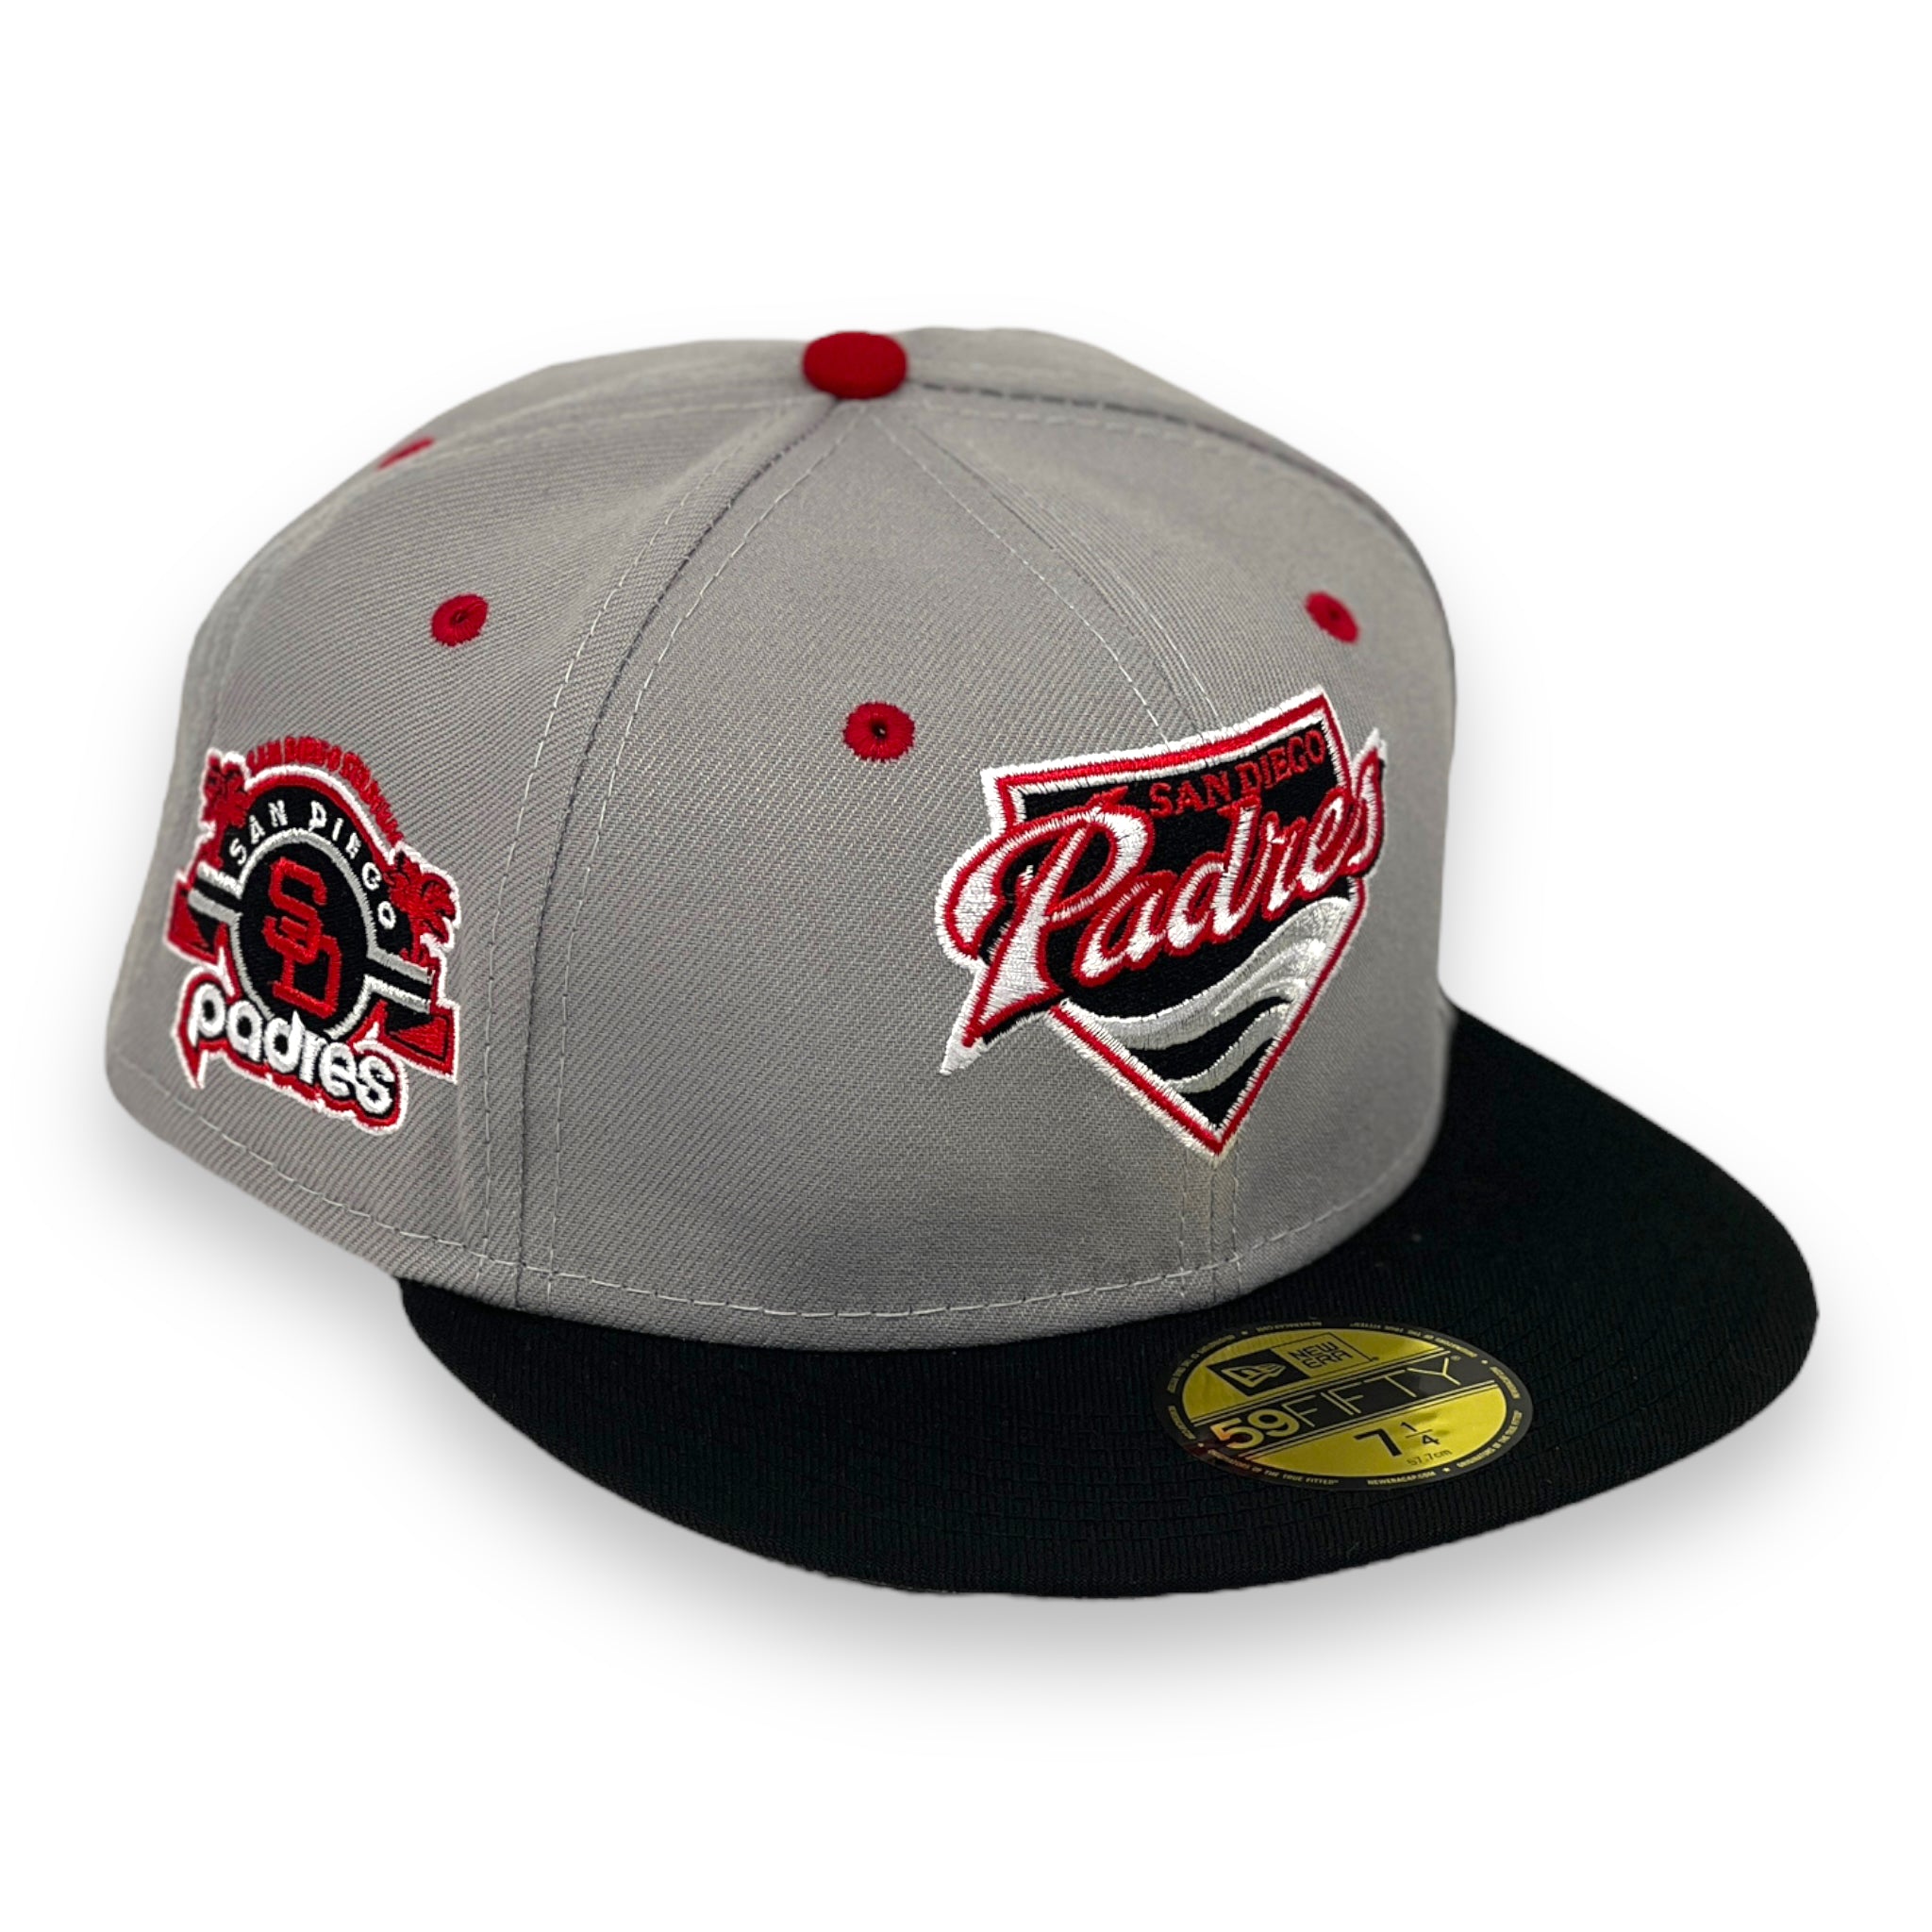 SAN DIEGO PADRES (GREY) NEW ERA 59FIFTY FITTED (SILVER BULLET)